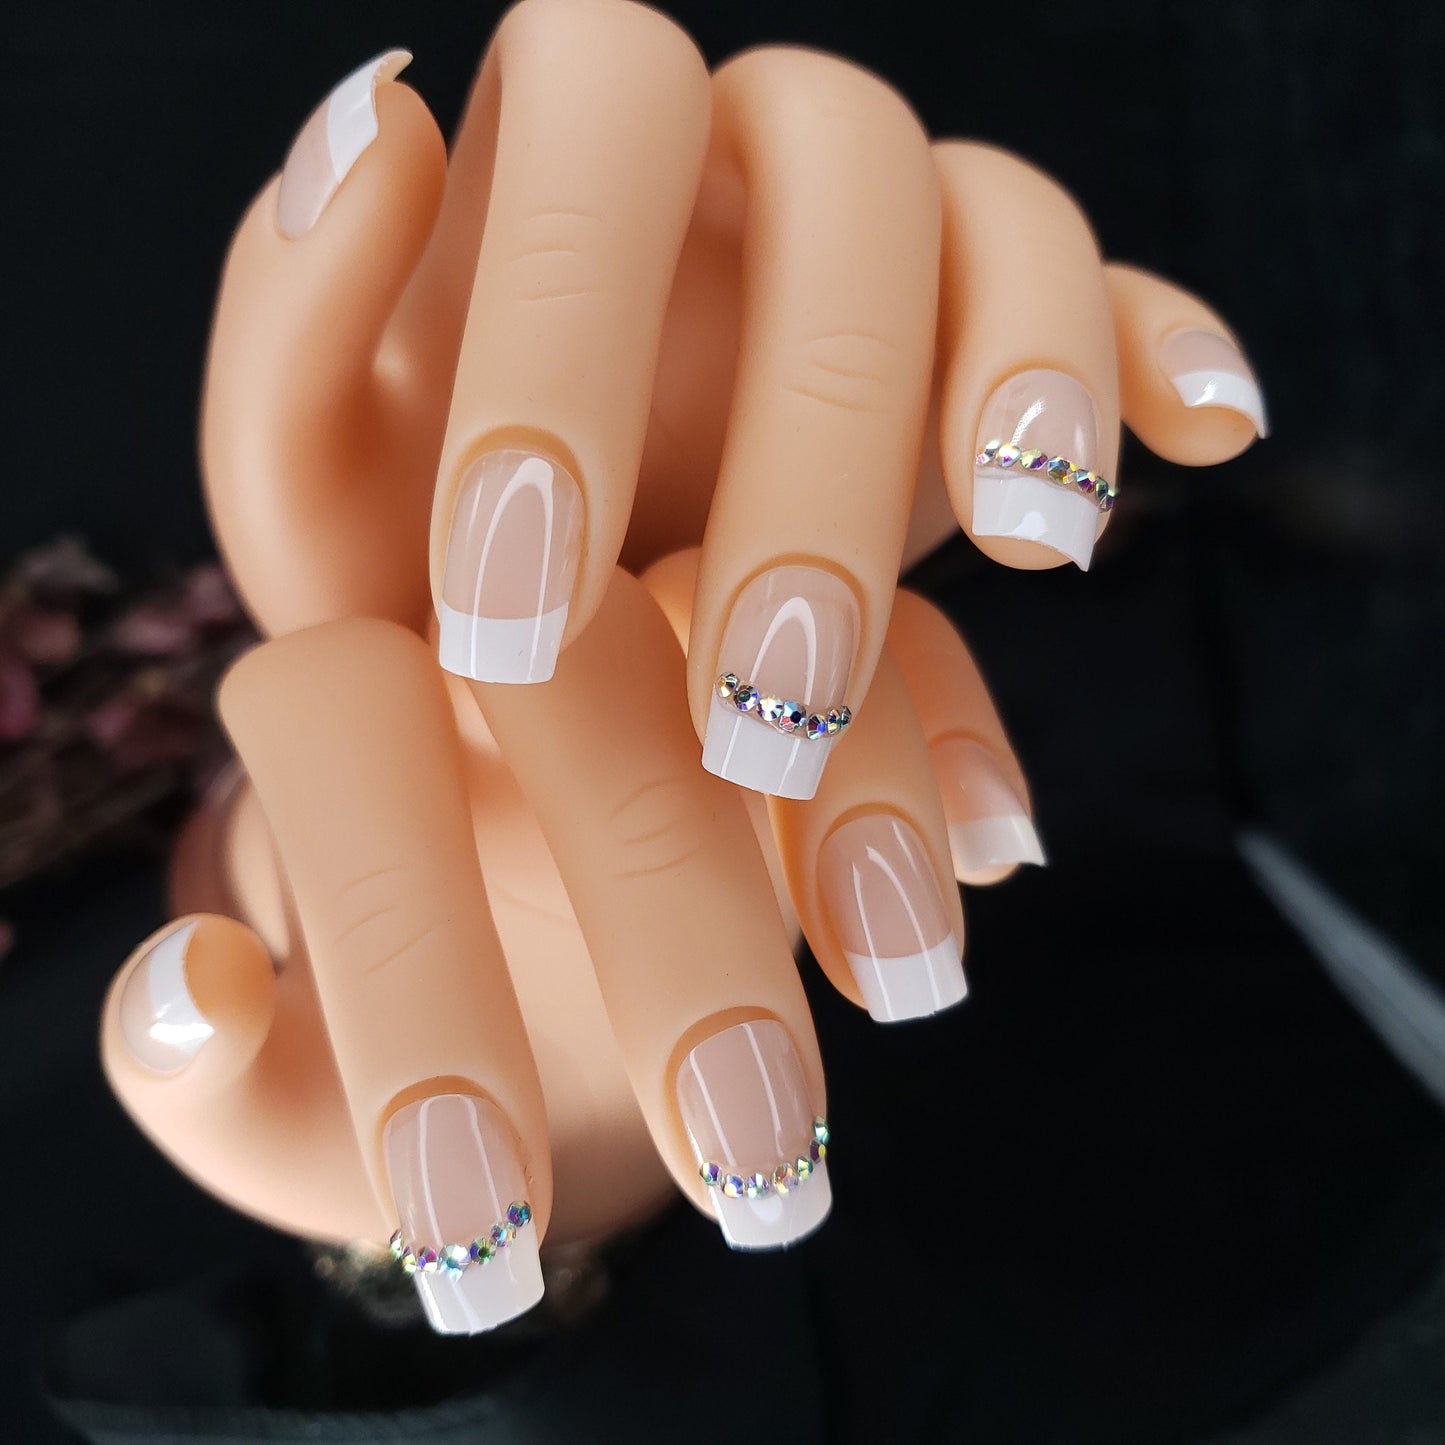 24 French Tip Manicure Nude White Rhinestone gem Press on Nails classic Glue on boomer square